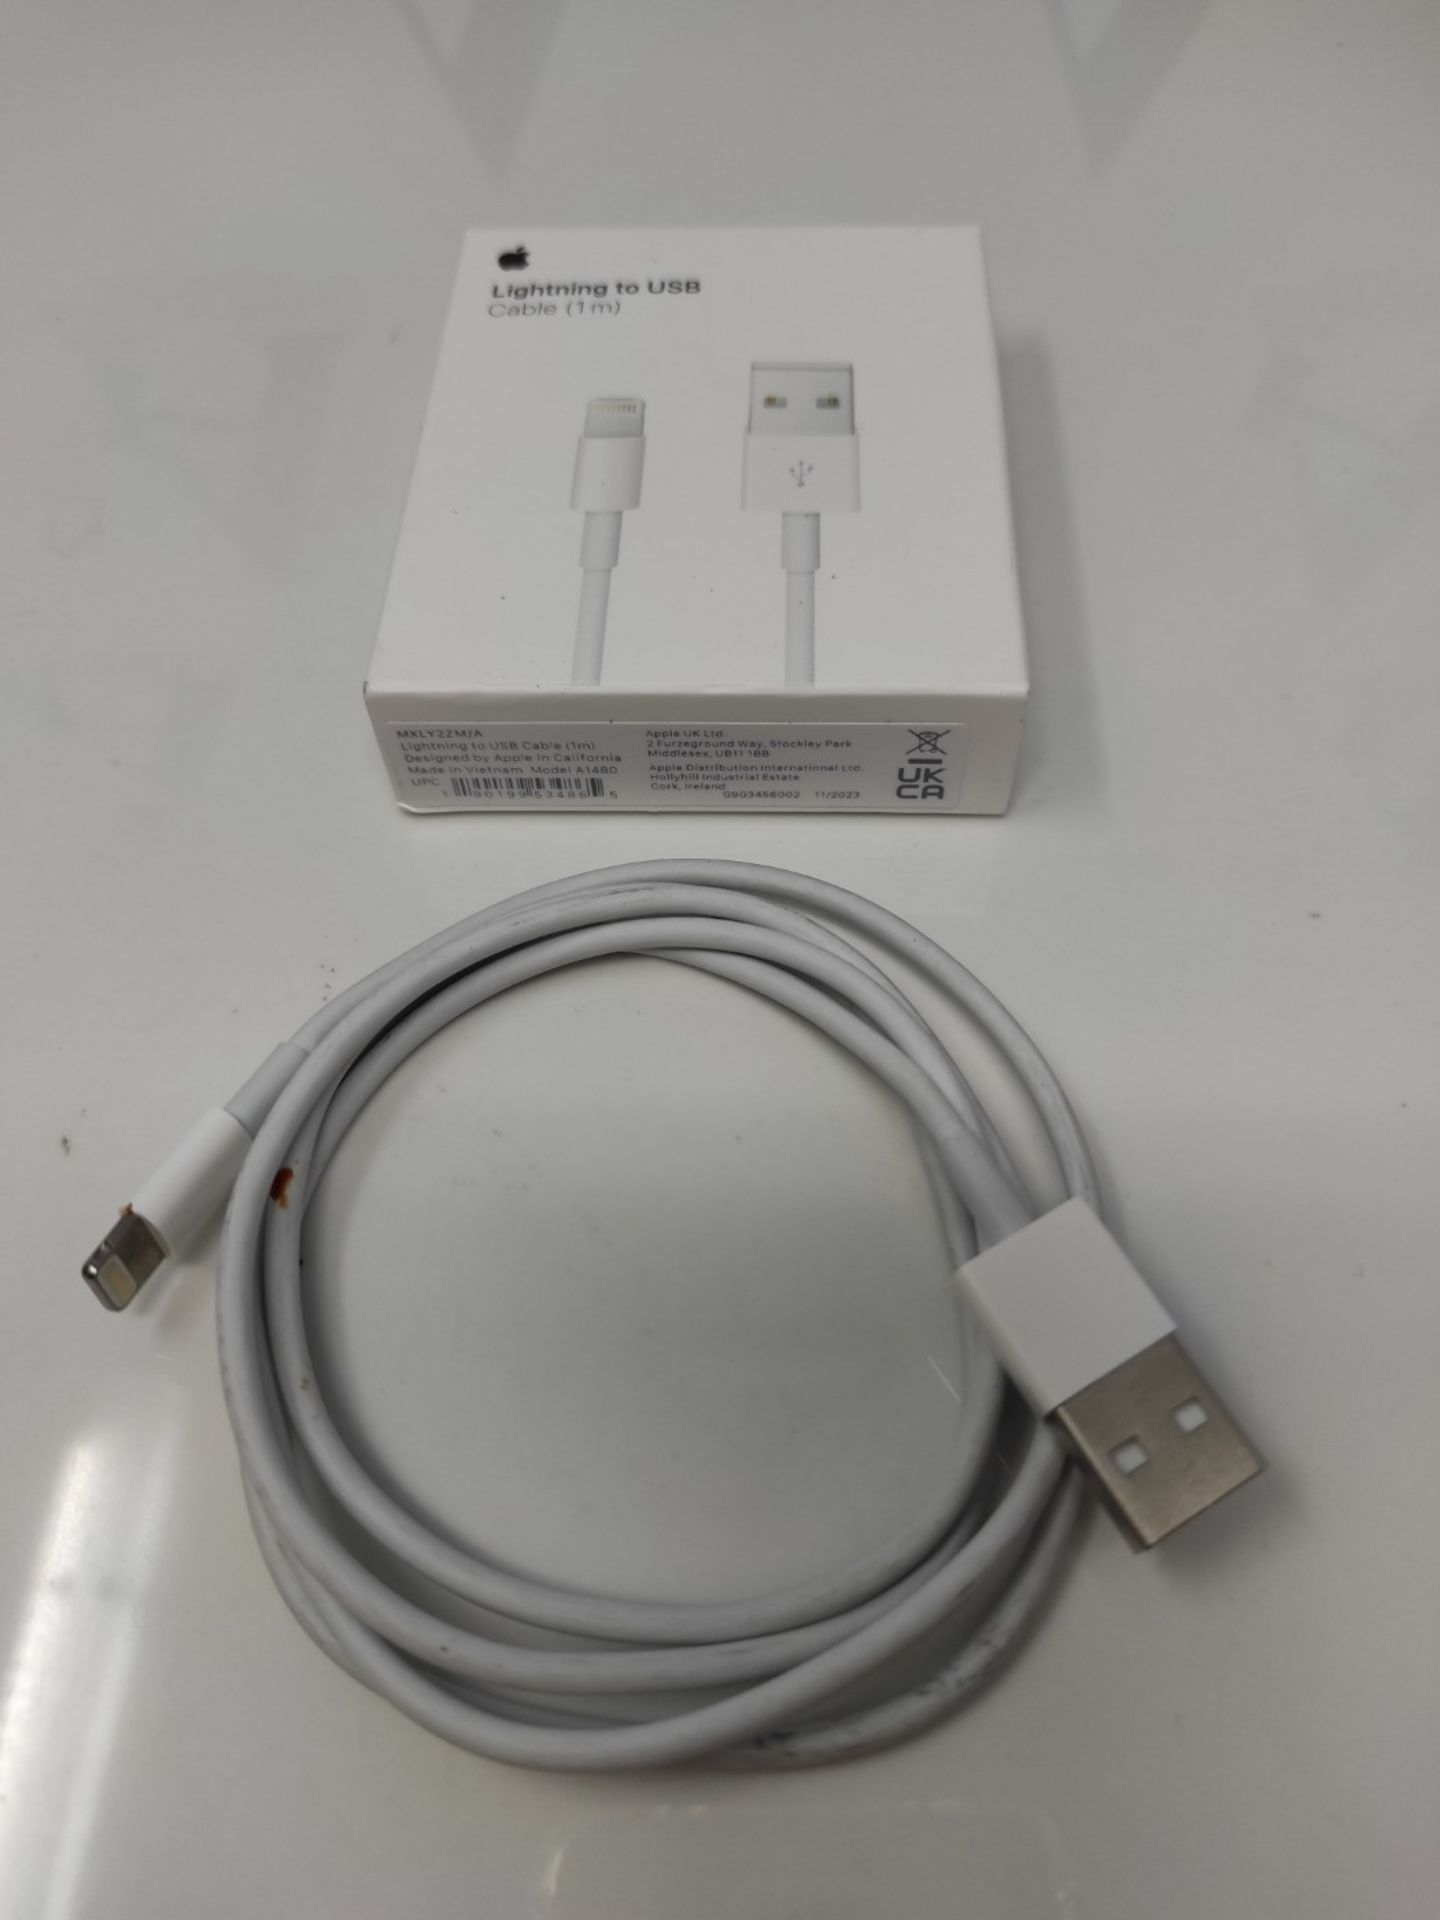 Apple Lightning to USB Cable (1m) Pack of 1 - Image 2 of 2